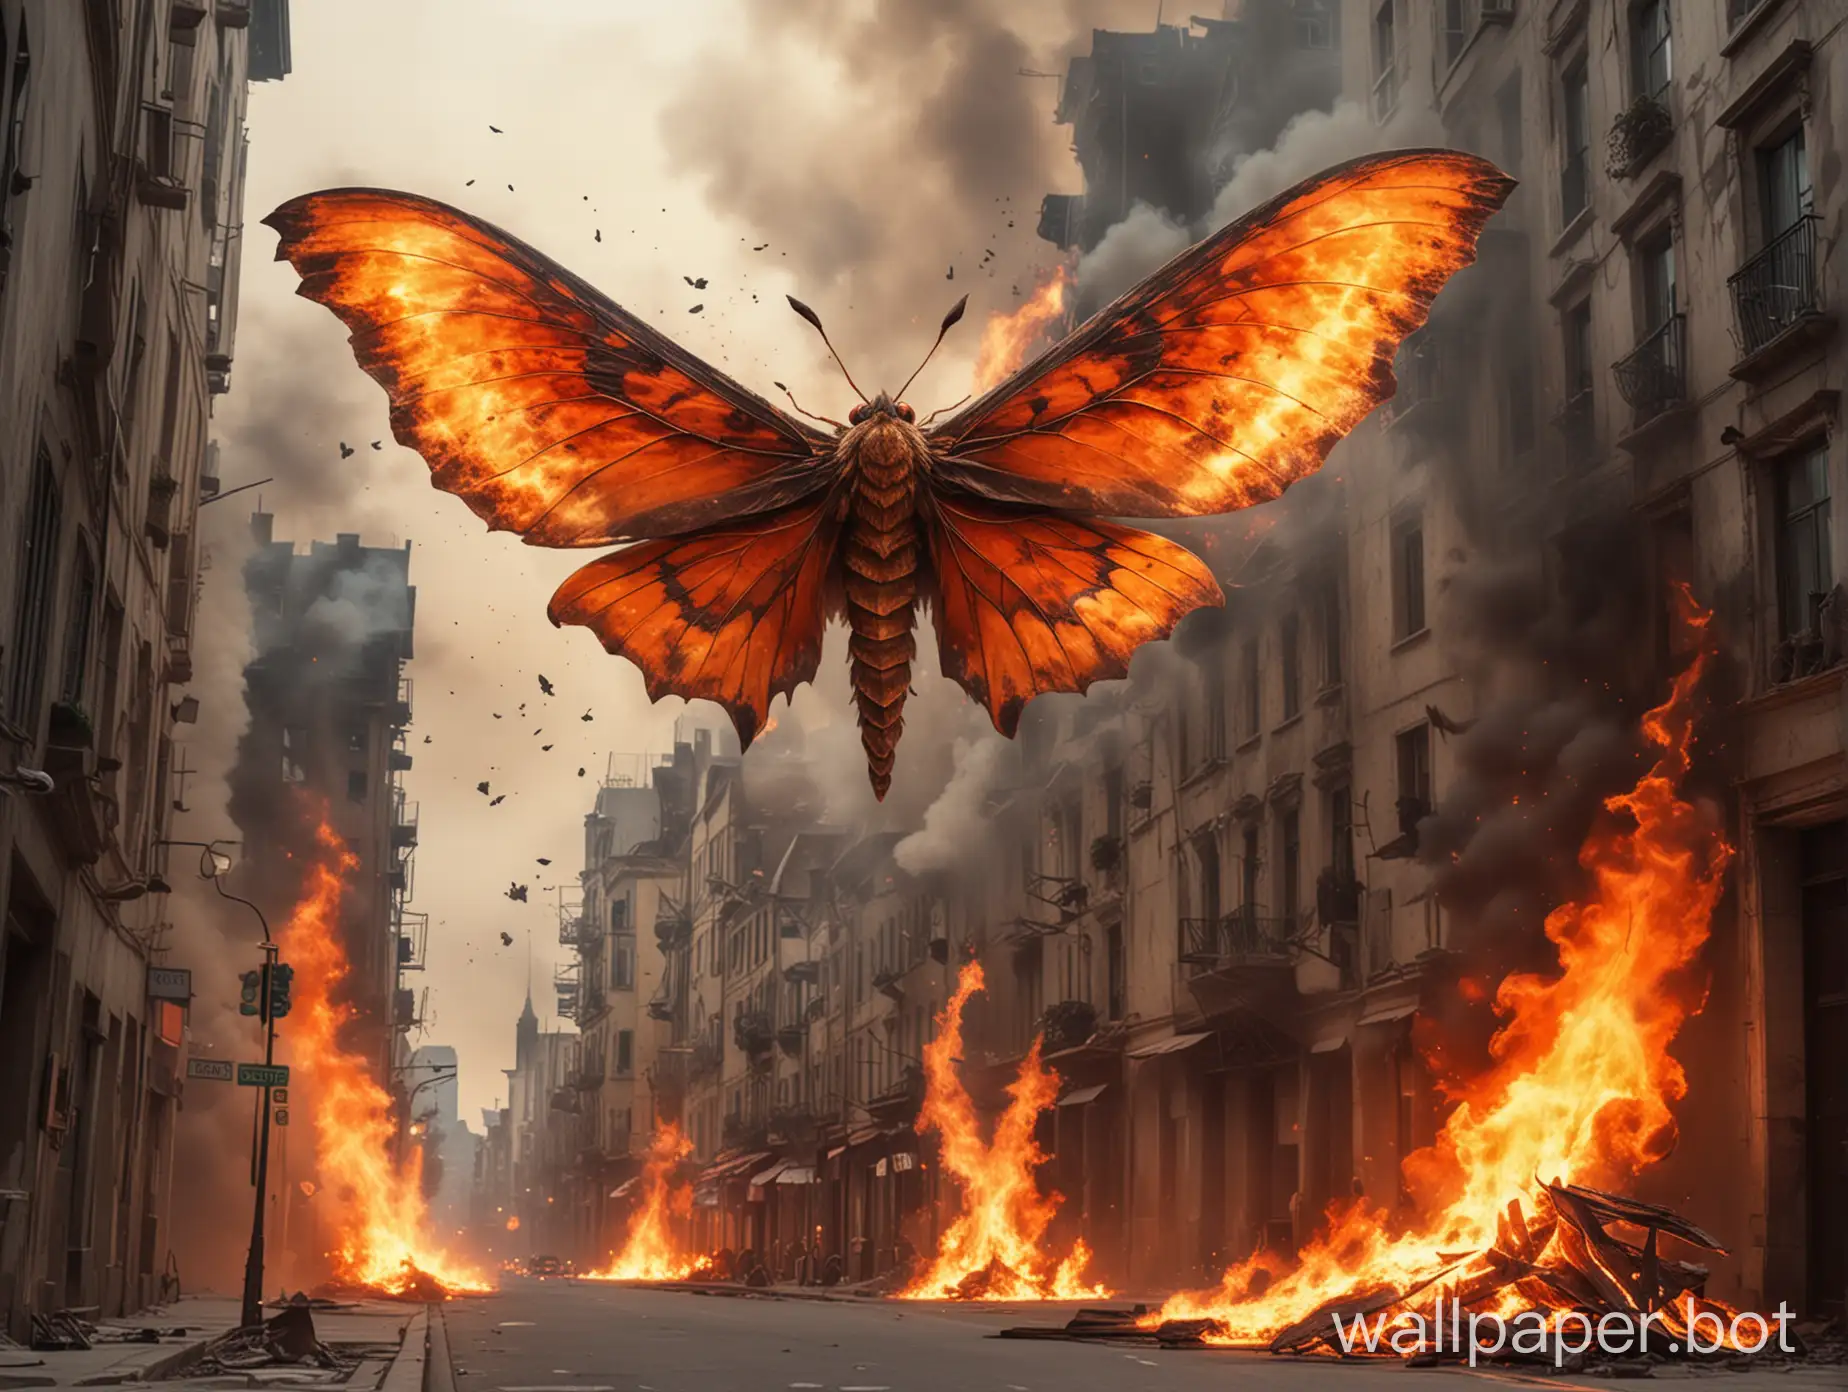 A giant moth with fiery wings flies over the city, wings are on fire, buildings on the street are burning